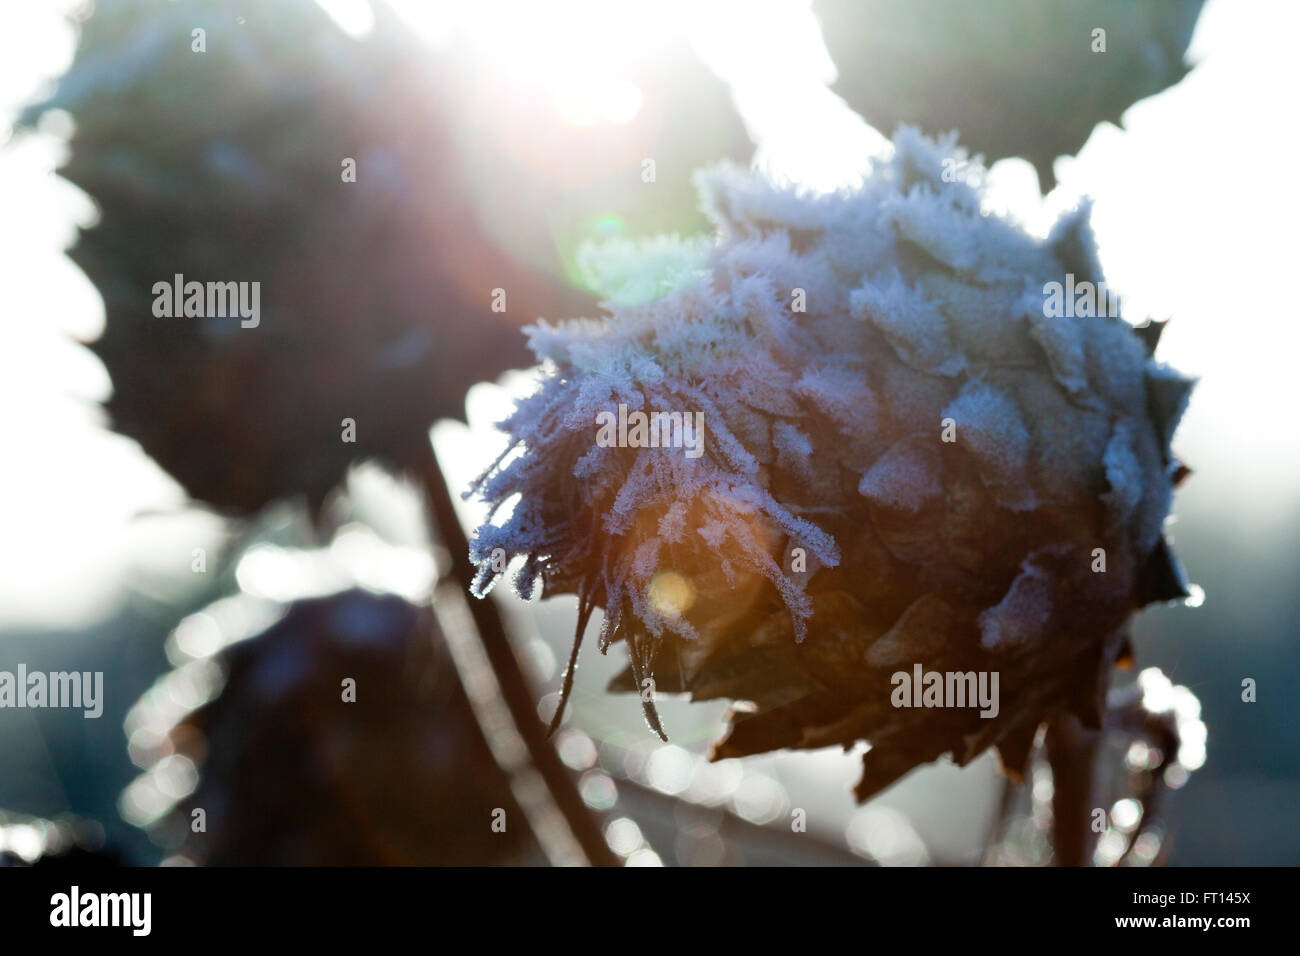 A cardoon plant dead and covered in early mornign frost crystals that coats the artichoke like heads. Stock Photo